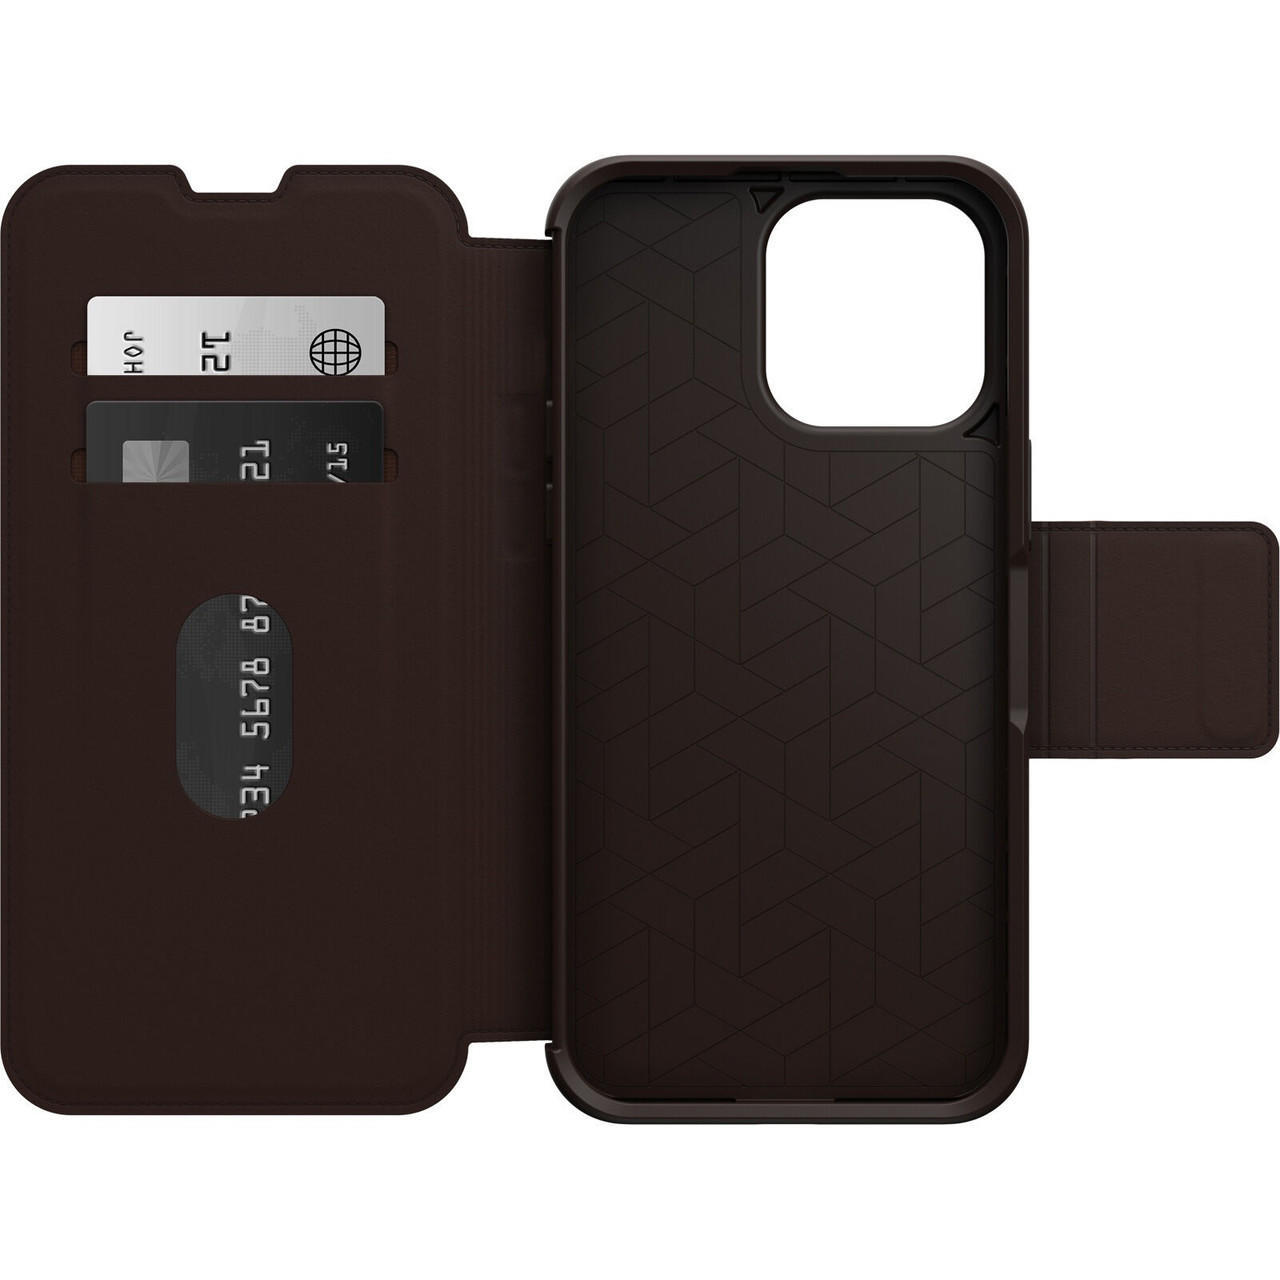 OTTERBOX Apple iPhone 14 Pro Max Strada Series Case - Espresso (Brown) (77-88568), Wireless Charge Compatible, Credit Card Storage